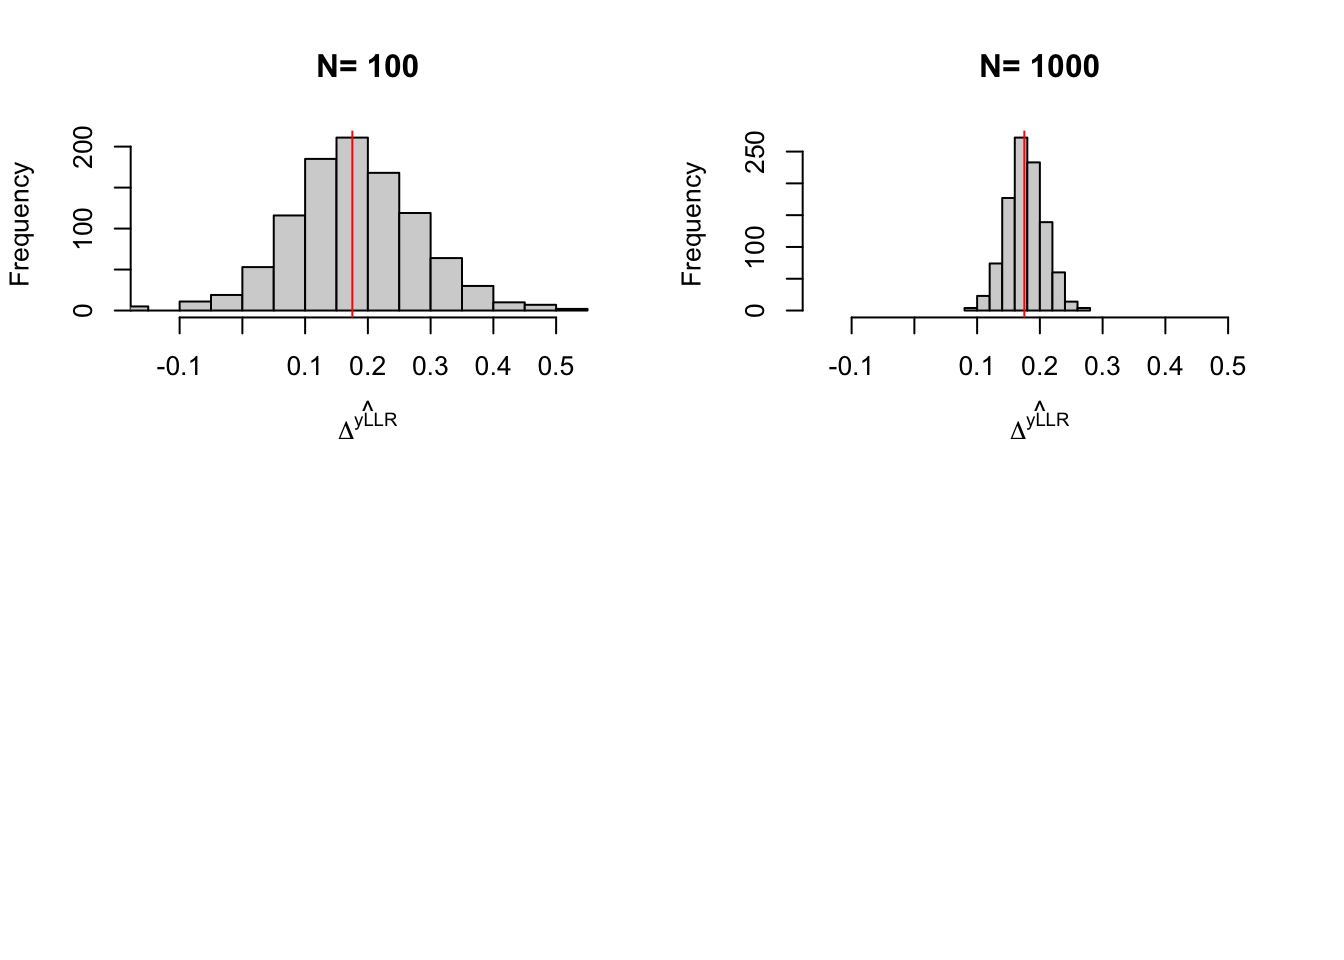 Distribution of the $LLR$ estimator over replications of samples of different sizes